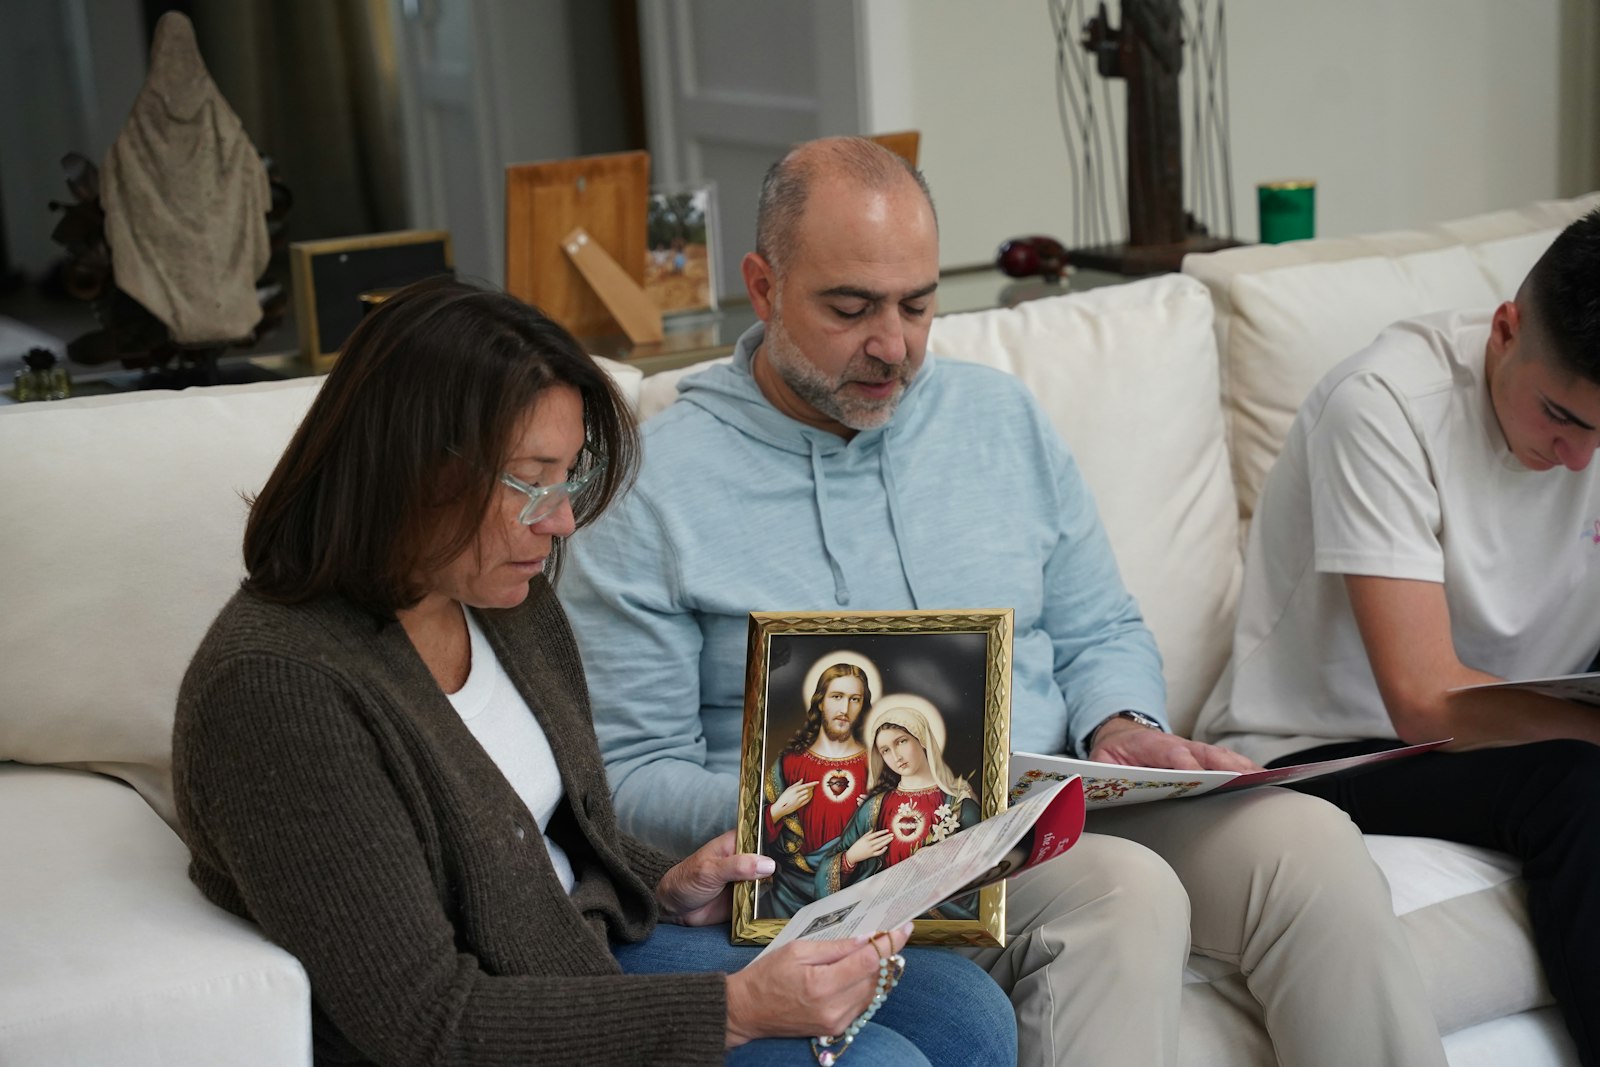 Saba Mona holds an image of the Sacred Heart of Jesus and the Immaculate Heart of Mary while reciting a prayer during the enthronement of her family's home. Mona said hearing the prayer intentions of her children and her husband, Anthony, was particularly powerful.